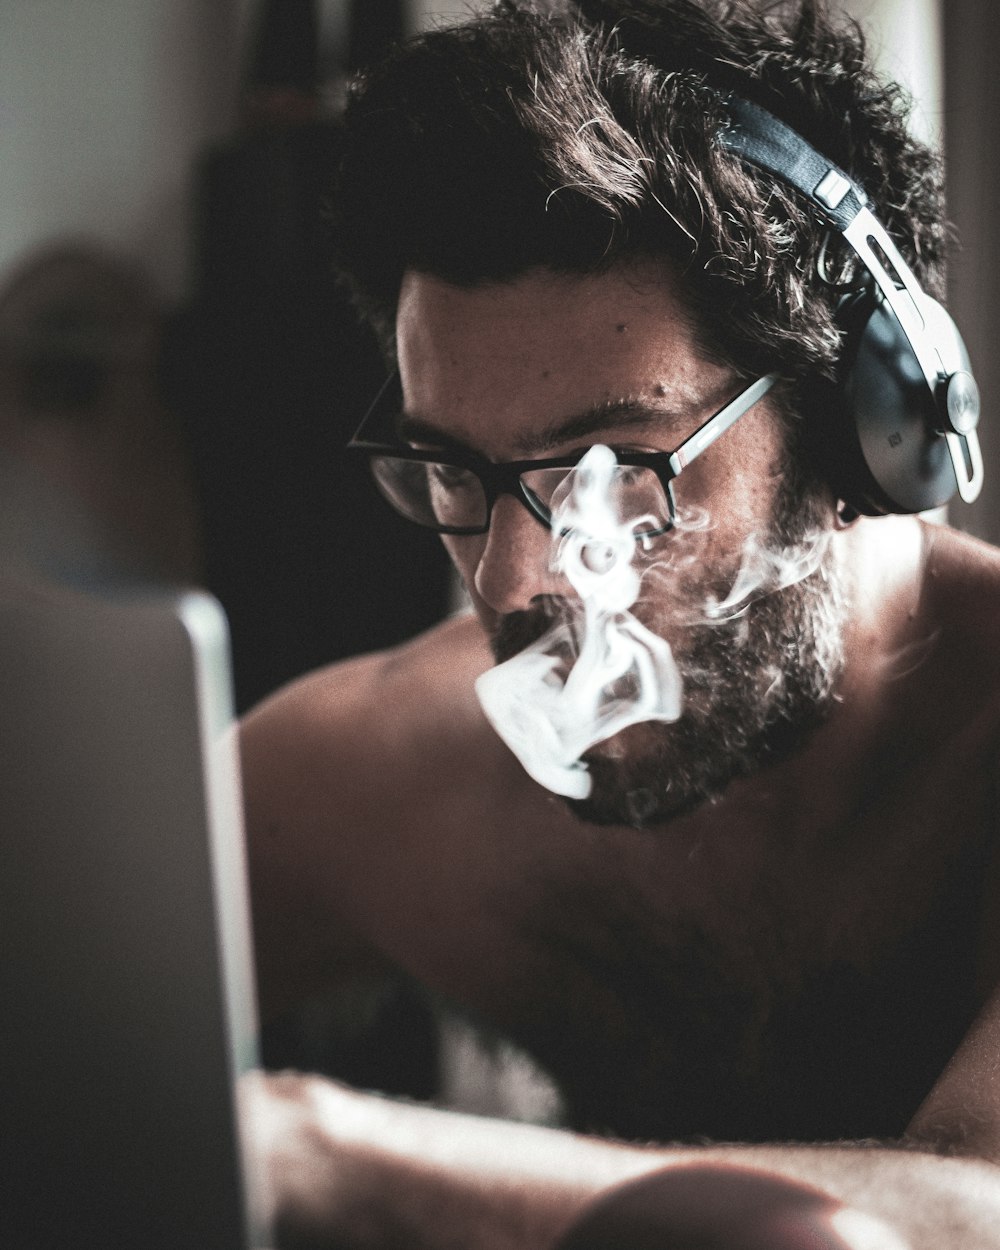 a man wearing headphones and smoking a cigarette